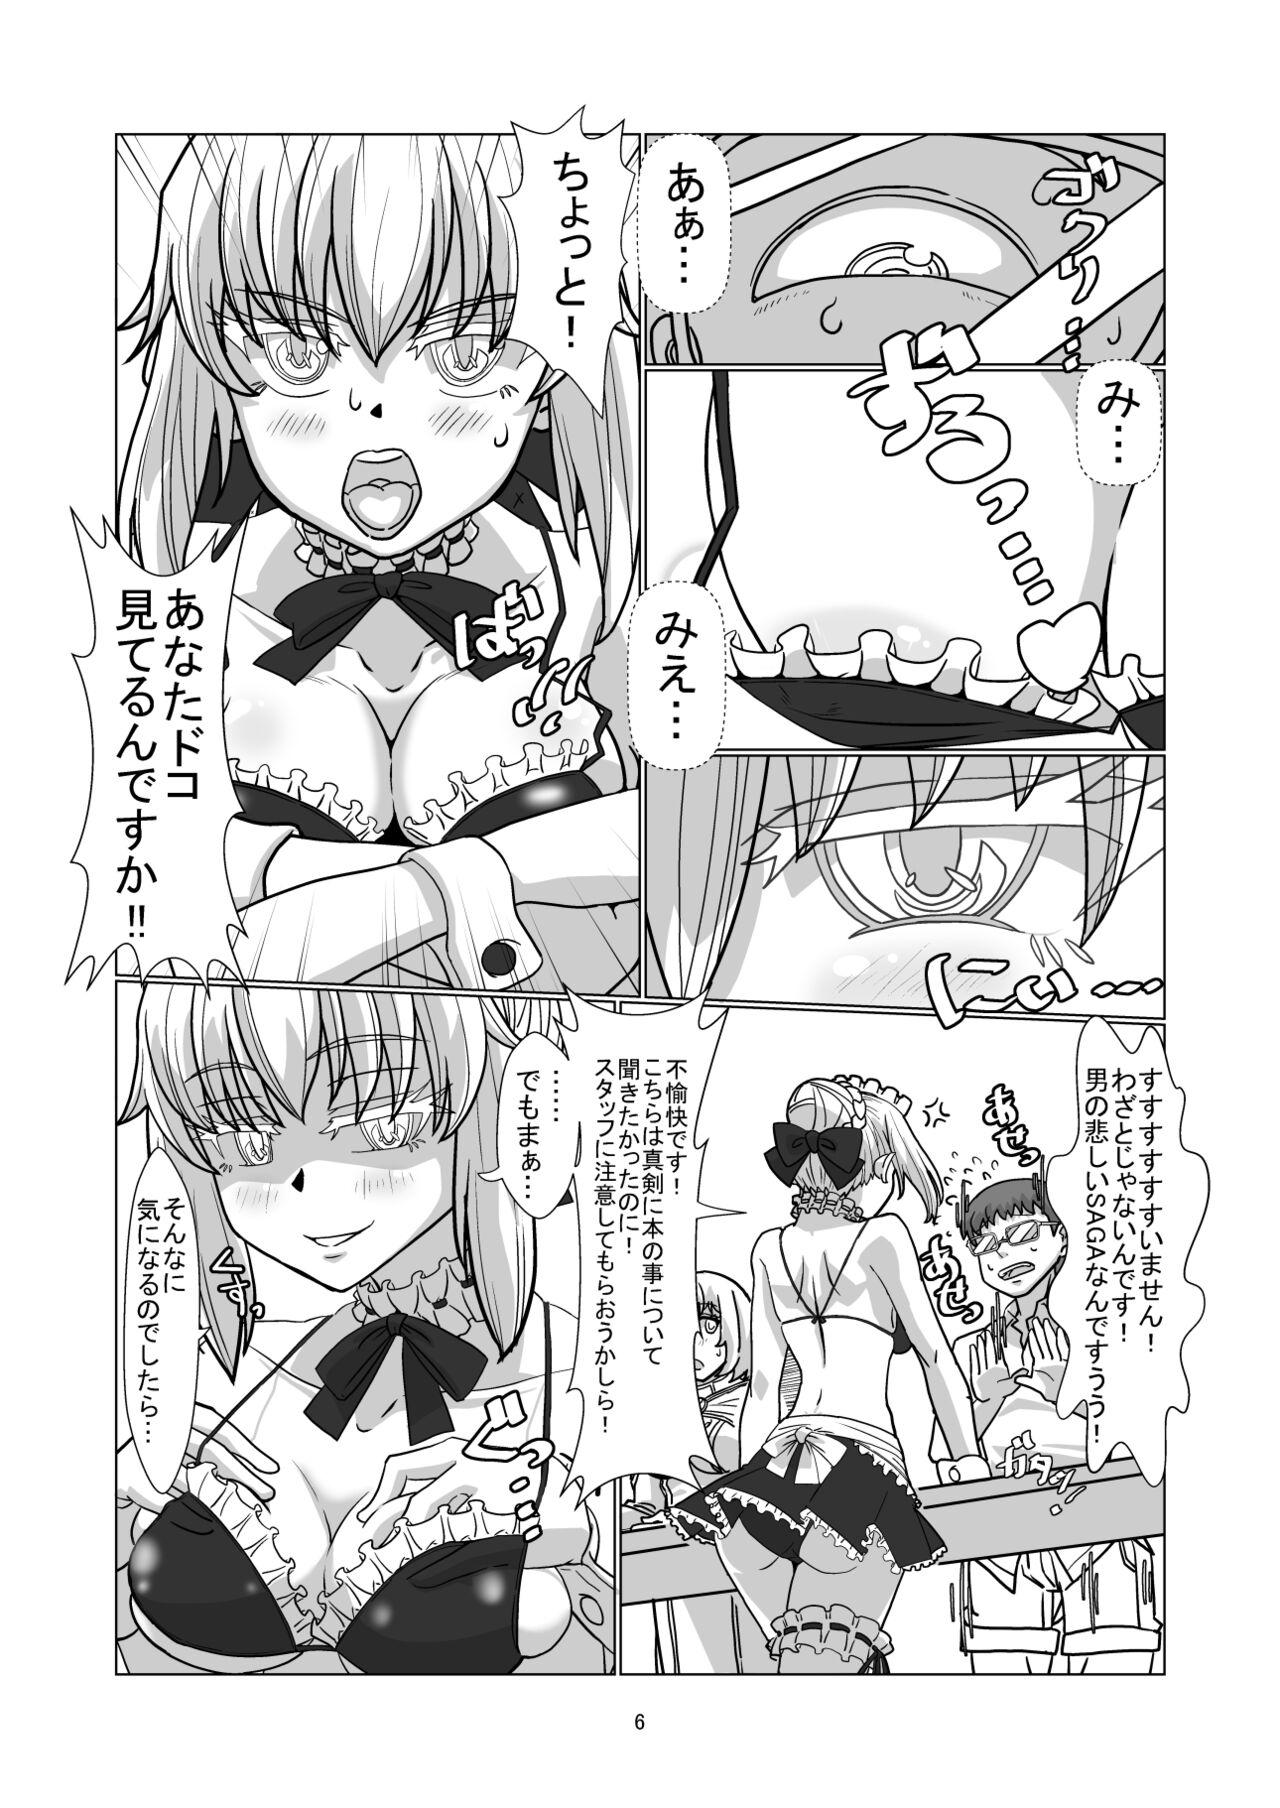 New コミケに参加しているコスプレイヤー達に憑依してエロい事する本 - Kantai collection Fate grand order Daring - Page 5